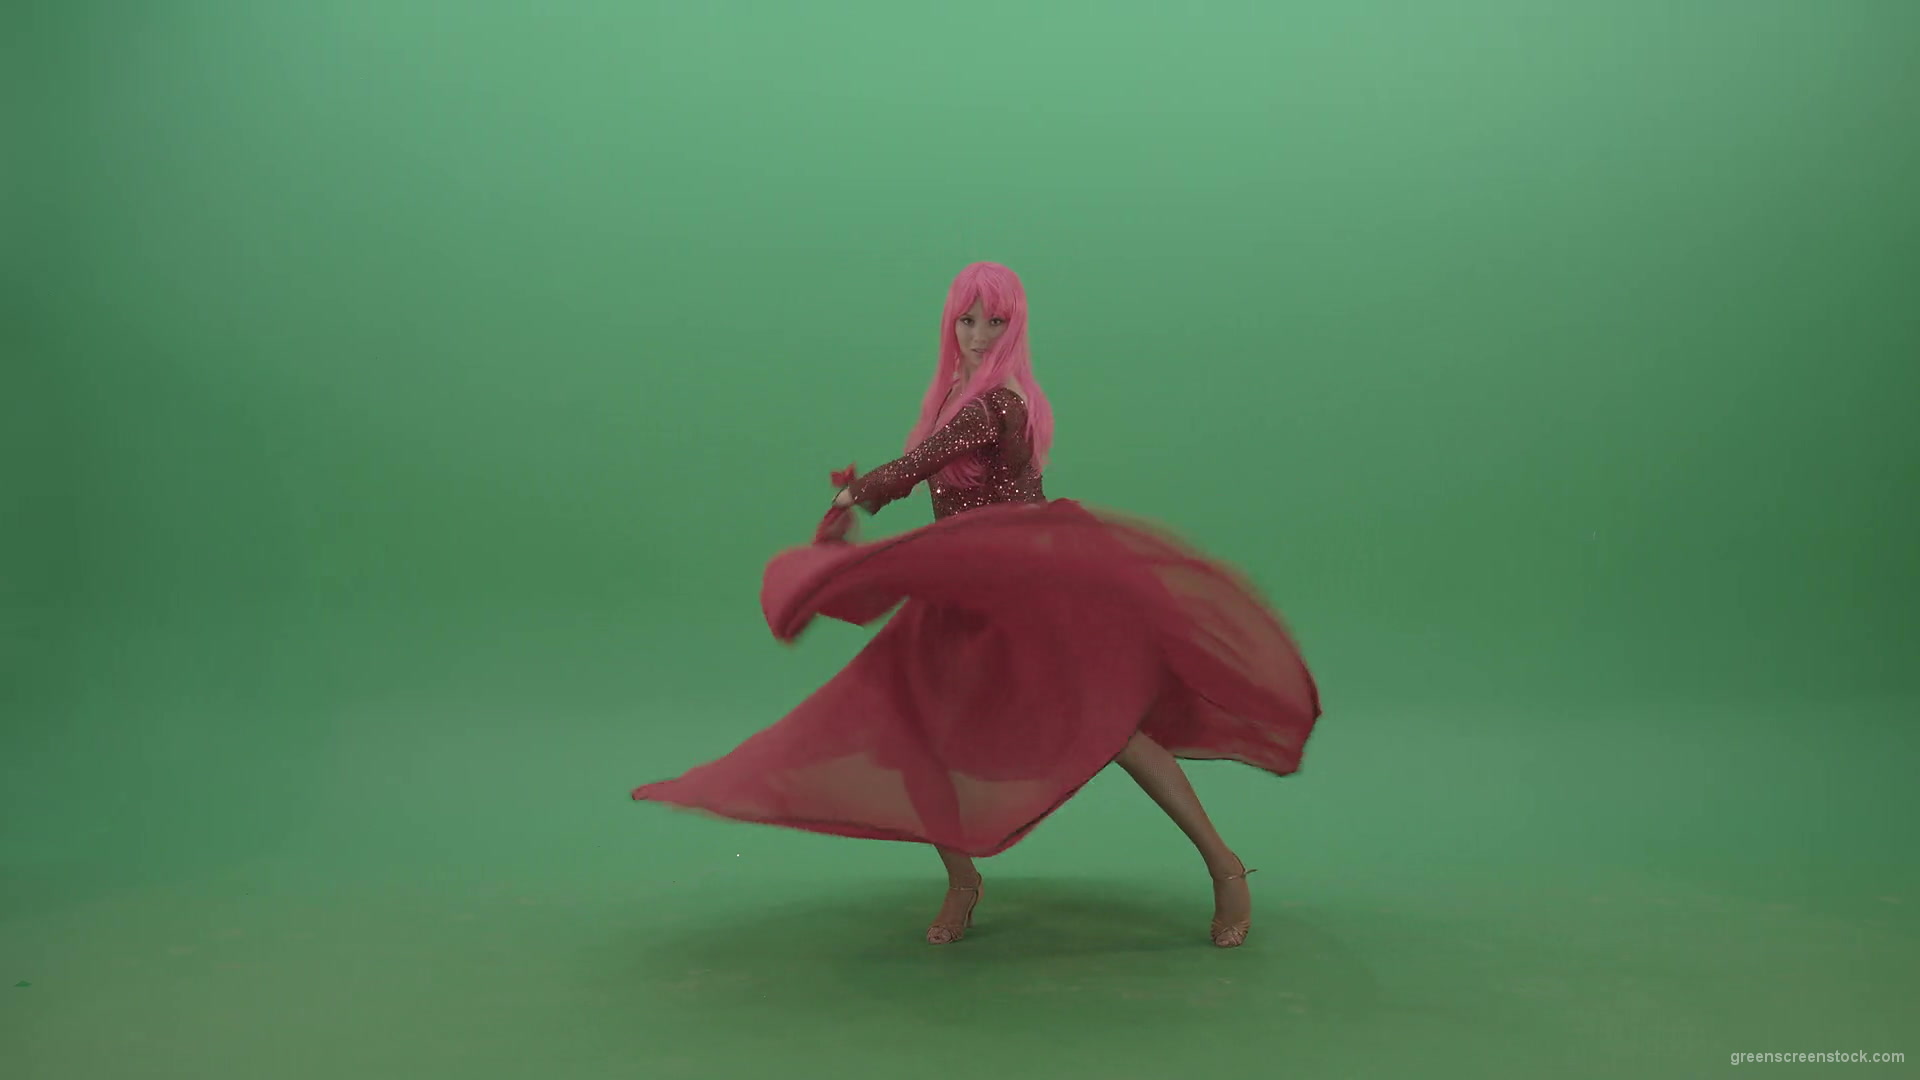 Beautiful-girl-in-red-dress-and-pink-hair-dancing-flamenco-and-spinning-on-green-screen-4K-Video-Footage-1920_005 Green Screen Stock